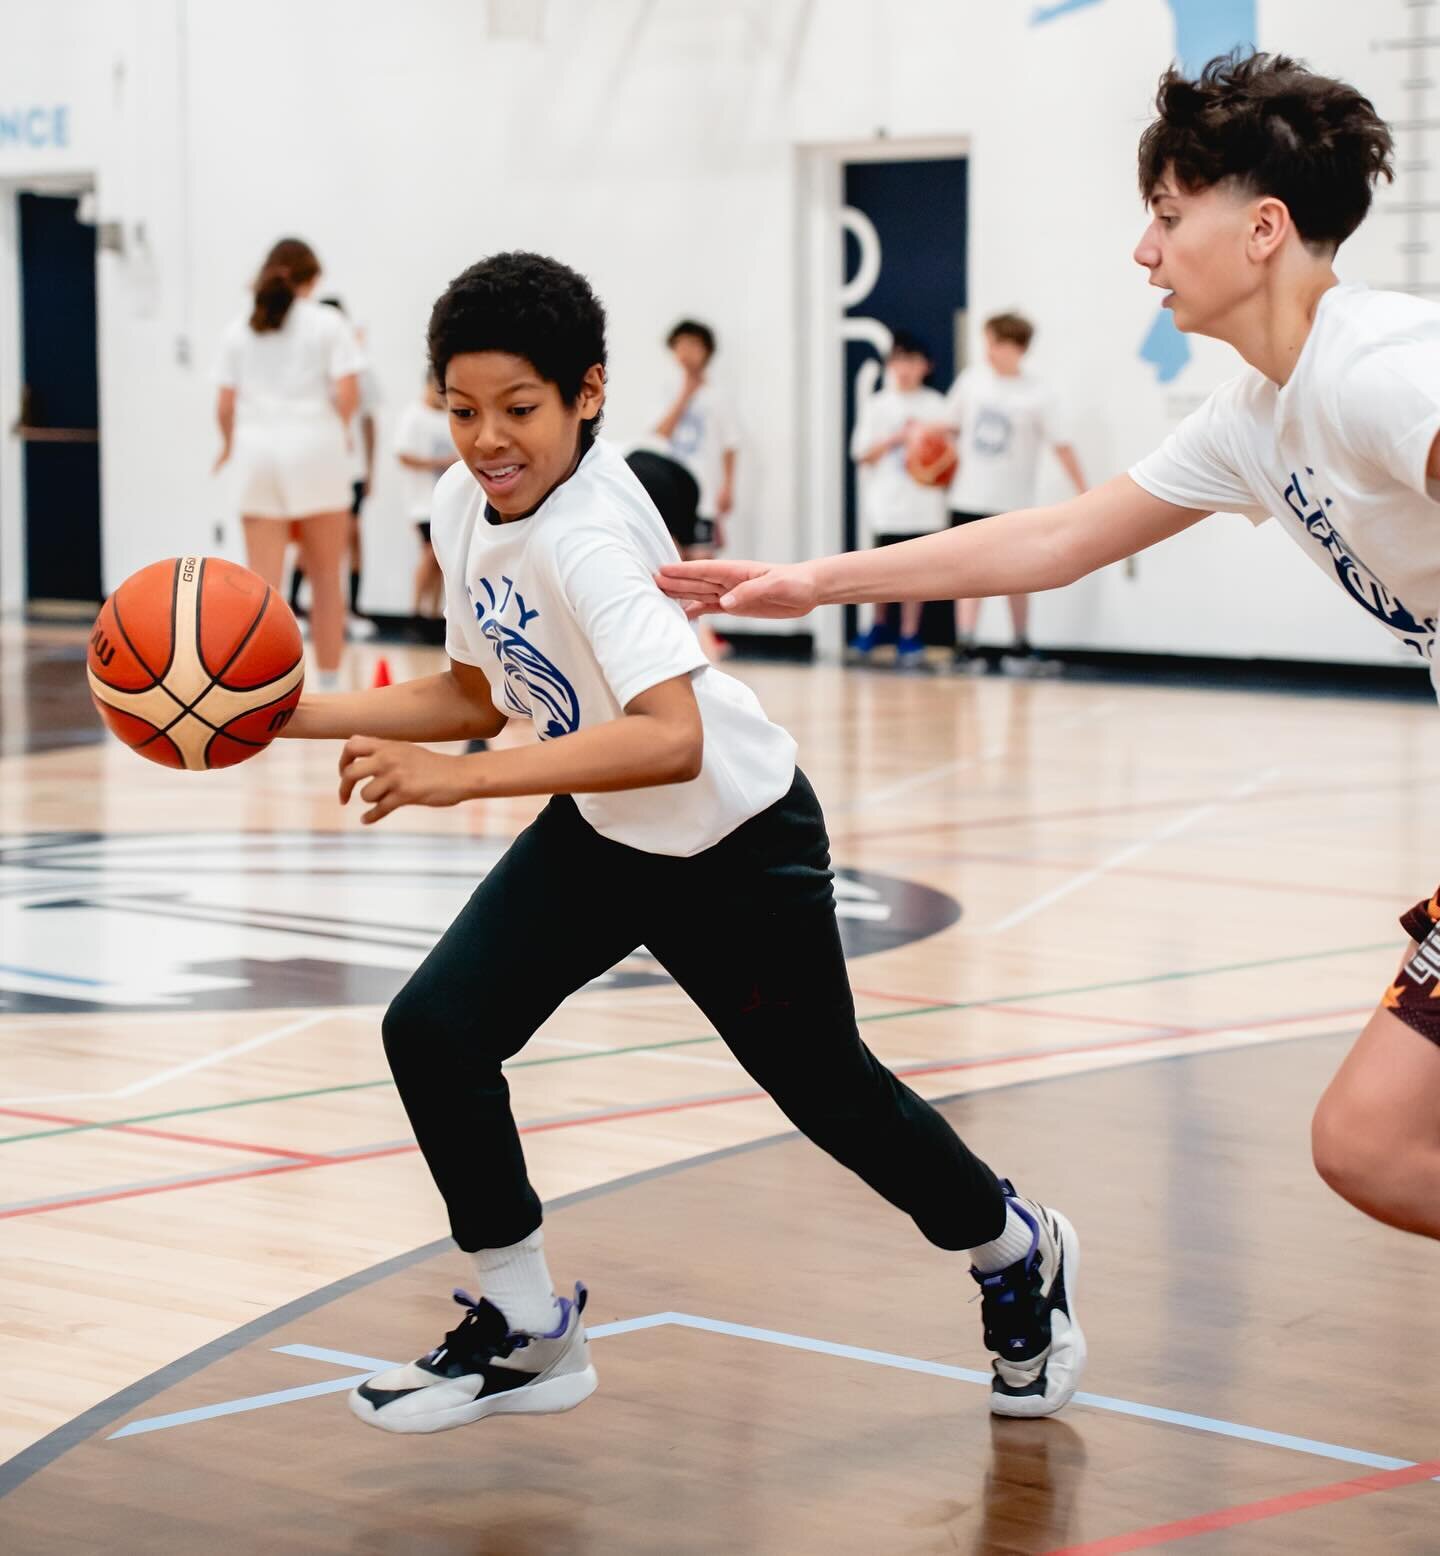 Pics from March Break Camp!

Can&rsquo;t wait for Summer Camps&hellip; but until then check out our weekly sessions to keep your skills on point.

📸: @imjayshots 

#CityHoops #Basketball #Toronto #Youth #Camps